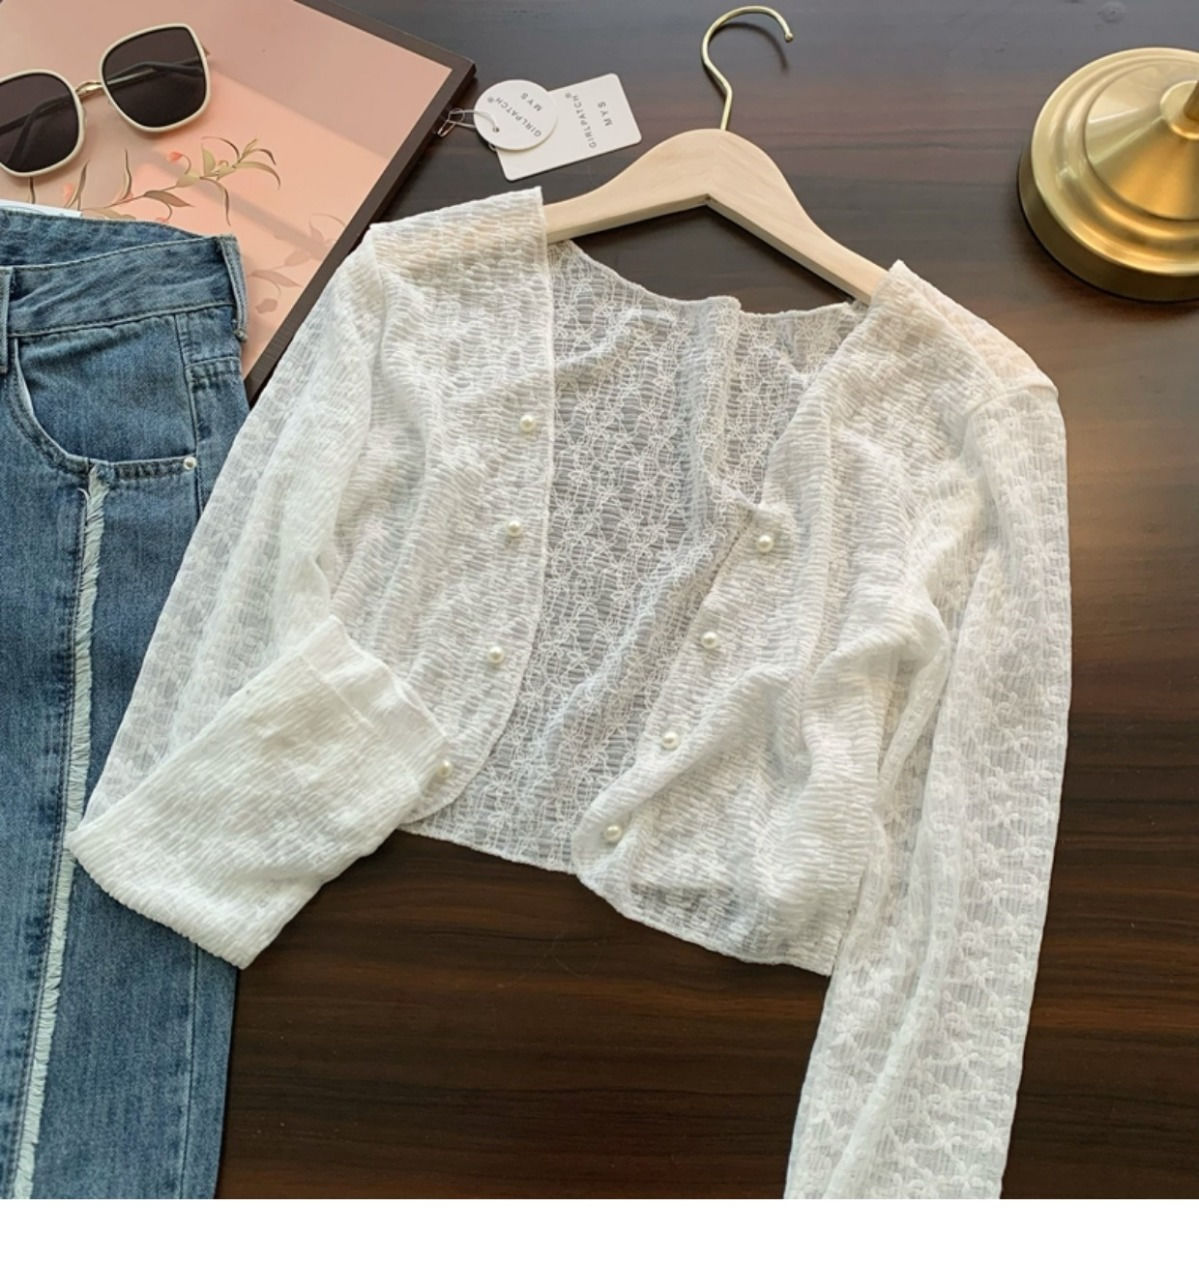 Summer new style lace sun protection cardigan jacket for women breathable thin versatile short style with suspenders air conditioning blouse top